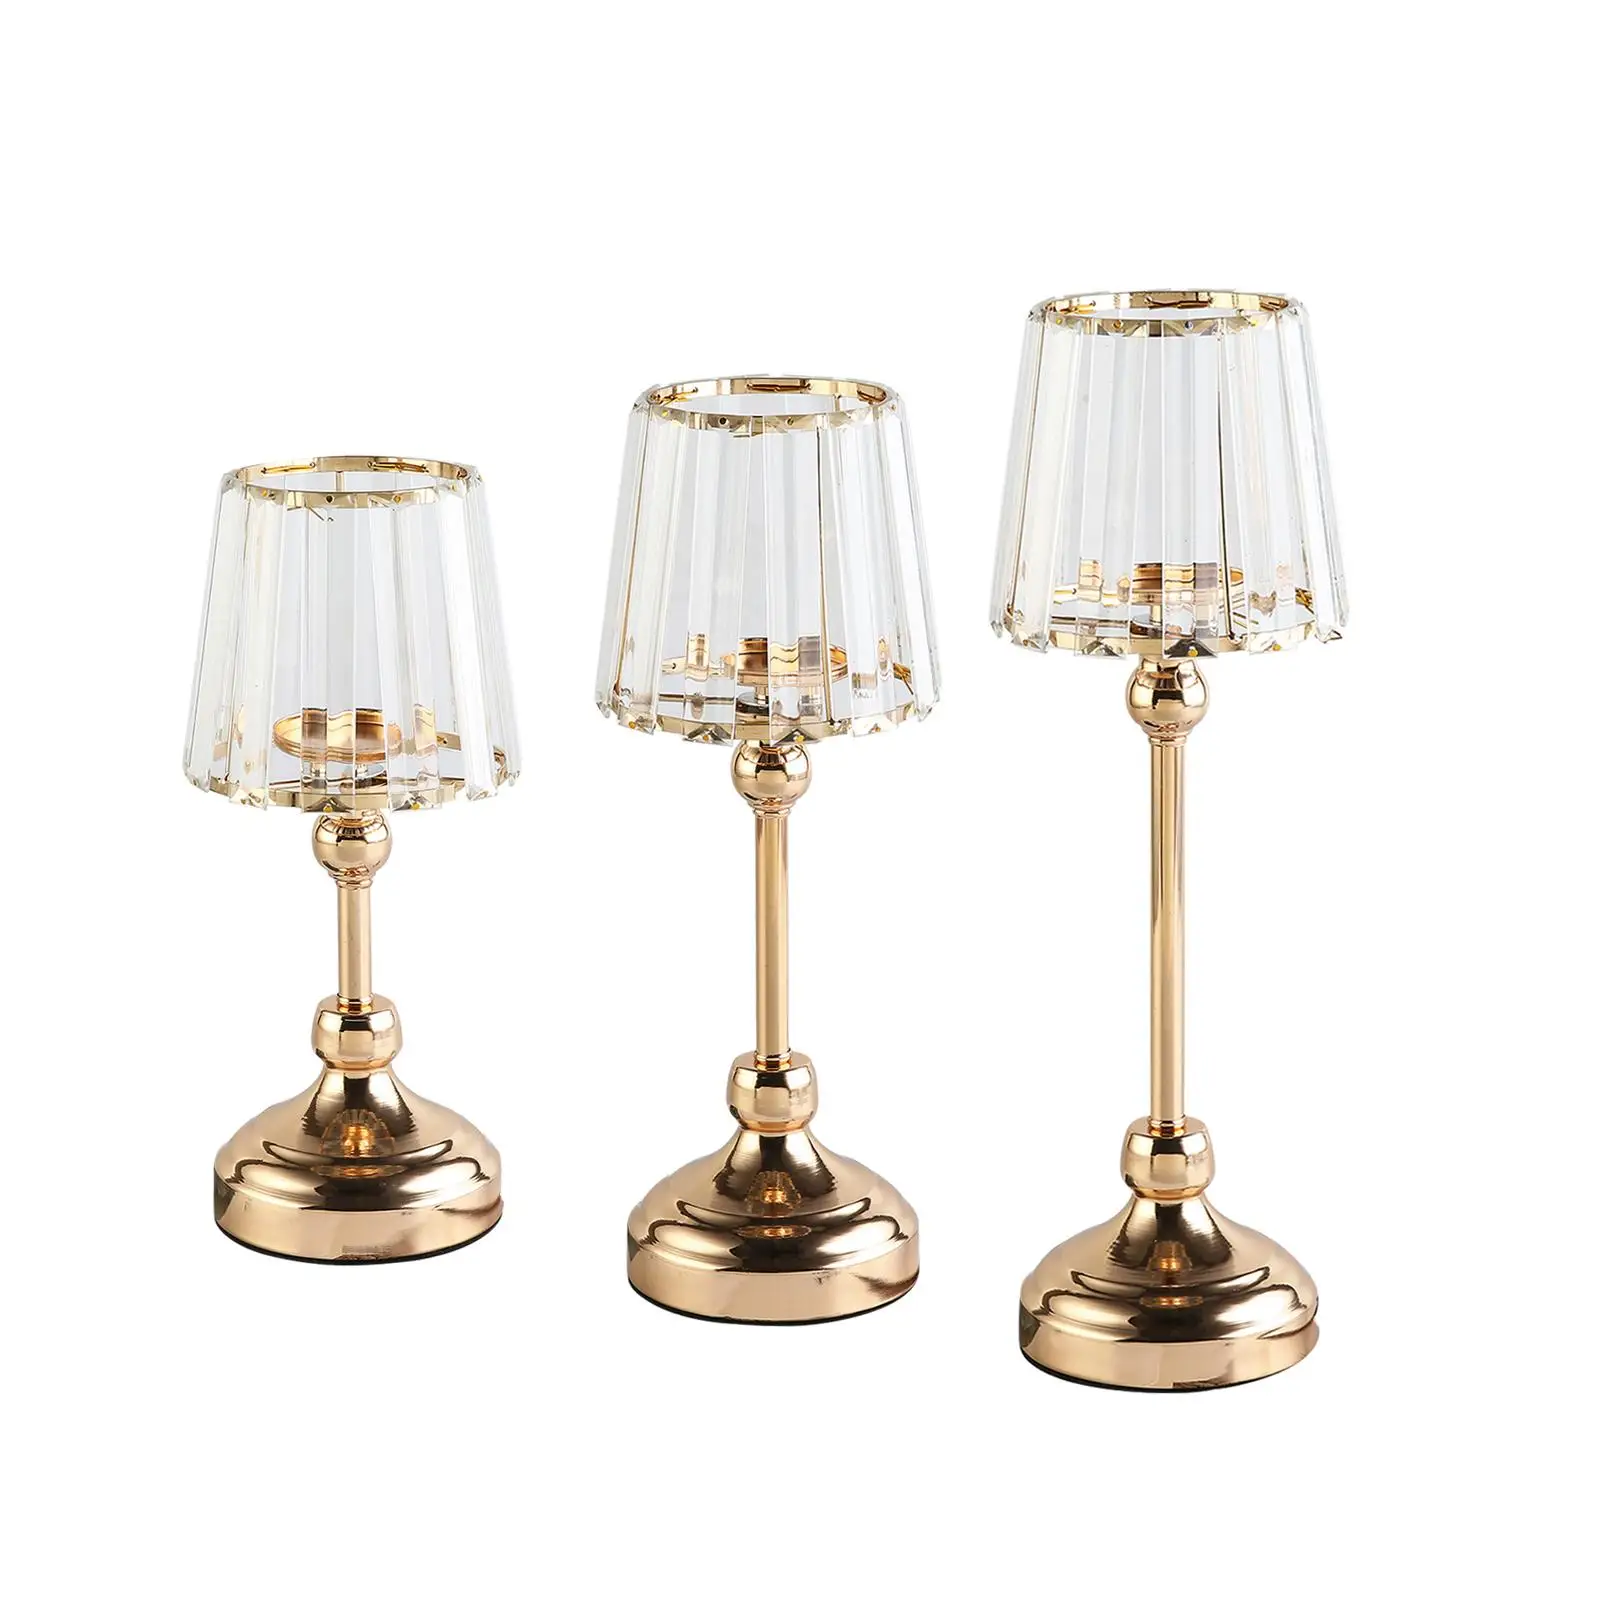 Modern Crystal Candle Holders Metal Candlestick Candle Stand Elegant for Table Centerpiece Bar Party Living Room Ornament